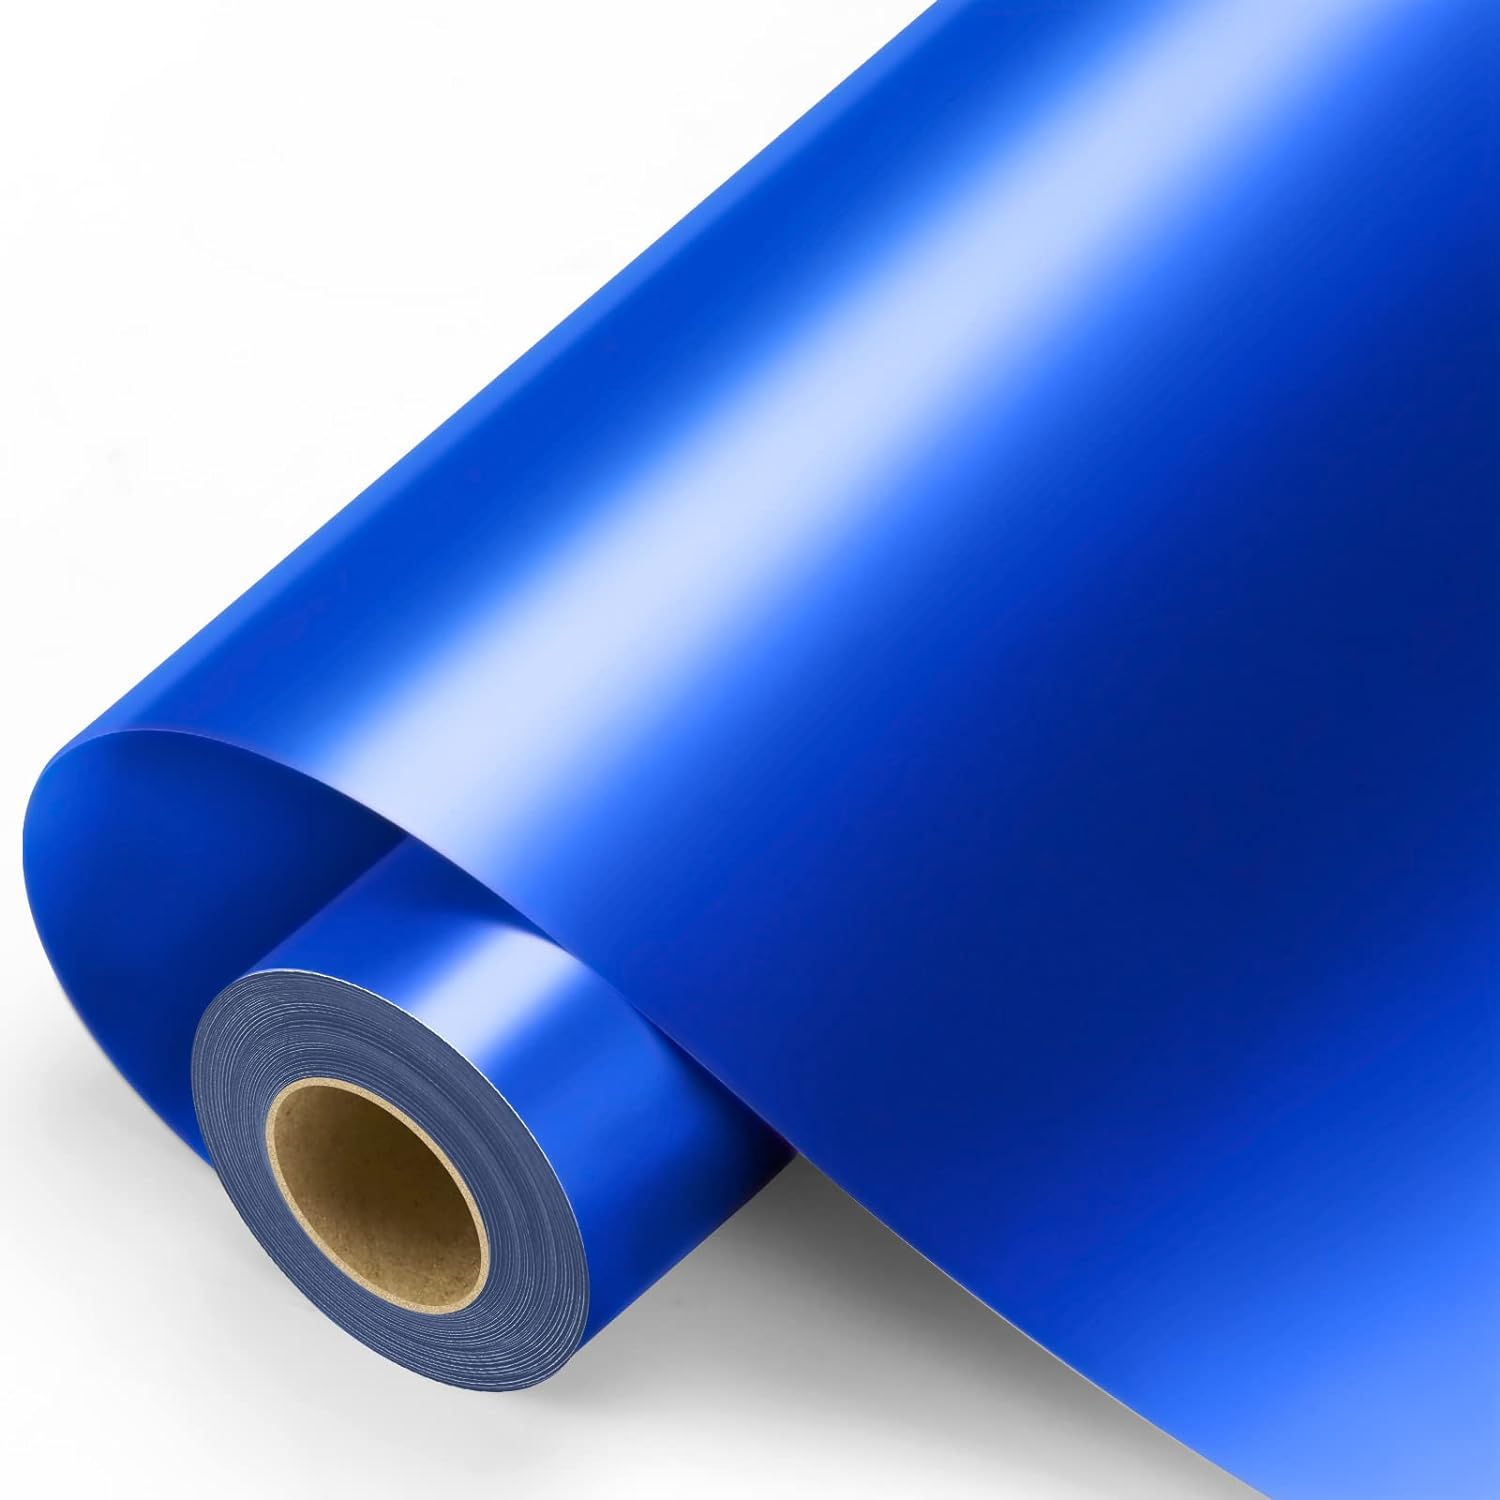 Blue Permanent Vinyl - 12x11FT Blue Adhesive Vinyl Roll for All Cutting Machine, Permanent Outdoor Vinyl for Decor Sticker, Car Decal, Scrapbooking, Signs, Glossy & Waterproof